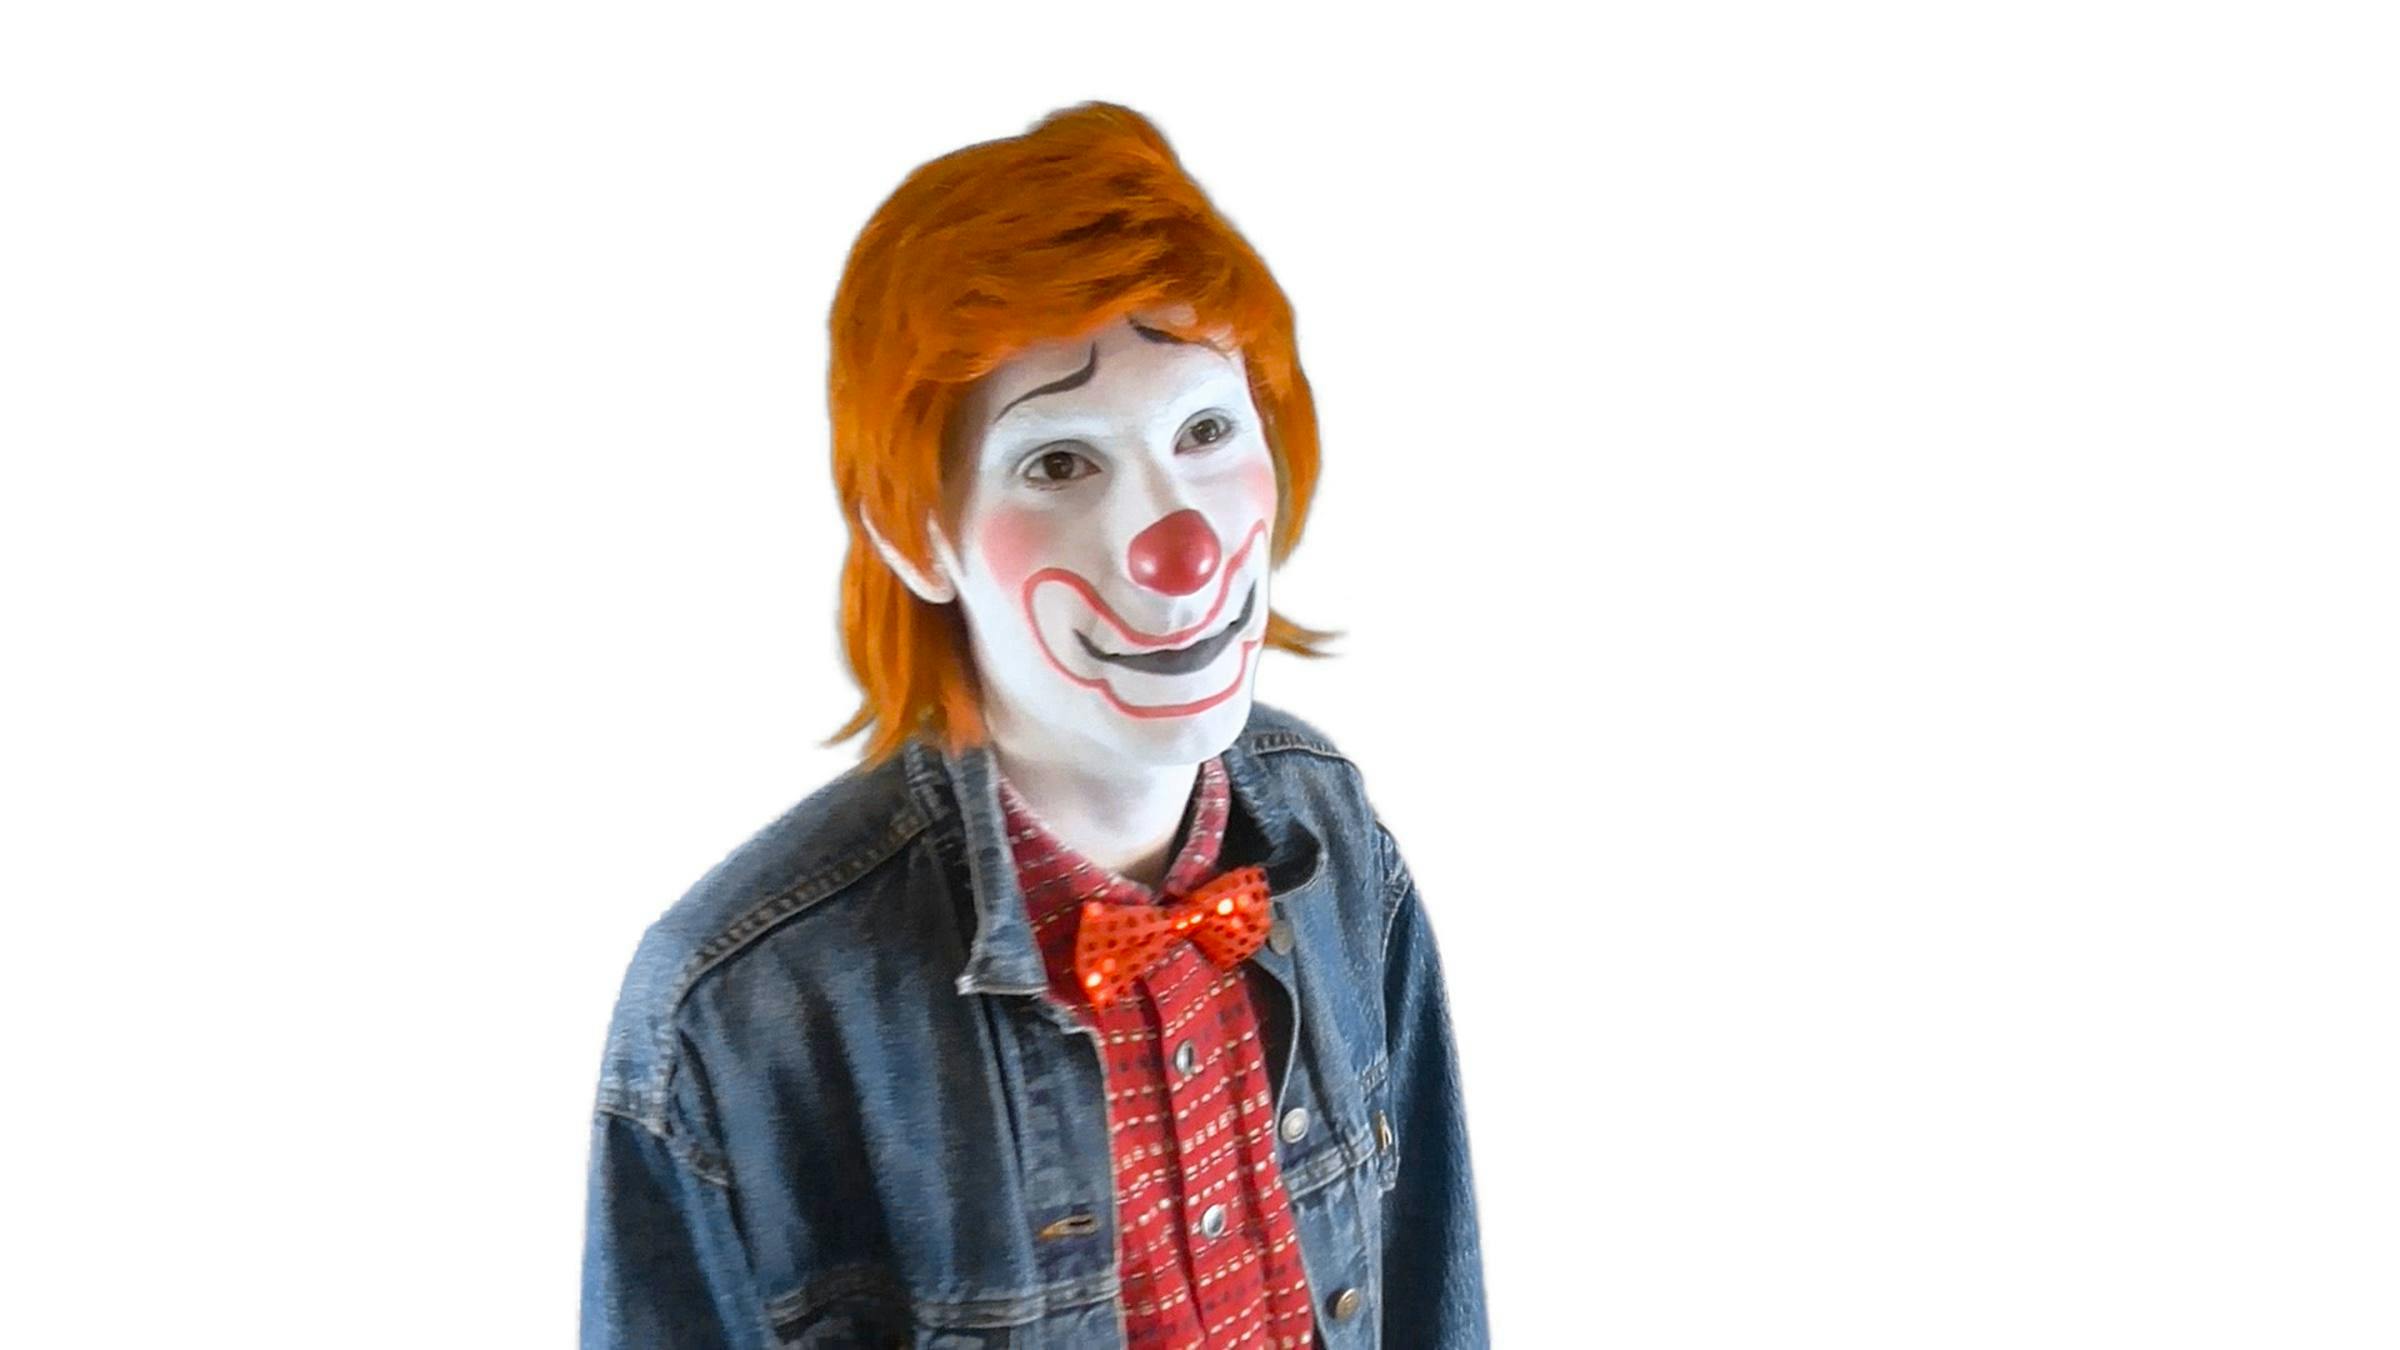 A person wearing clown-like make up, a red nose, orange hair and a red sparkling bow tie. The person is against a white background.